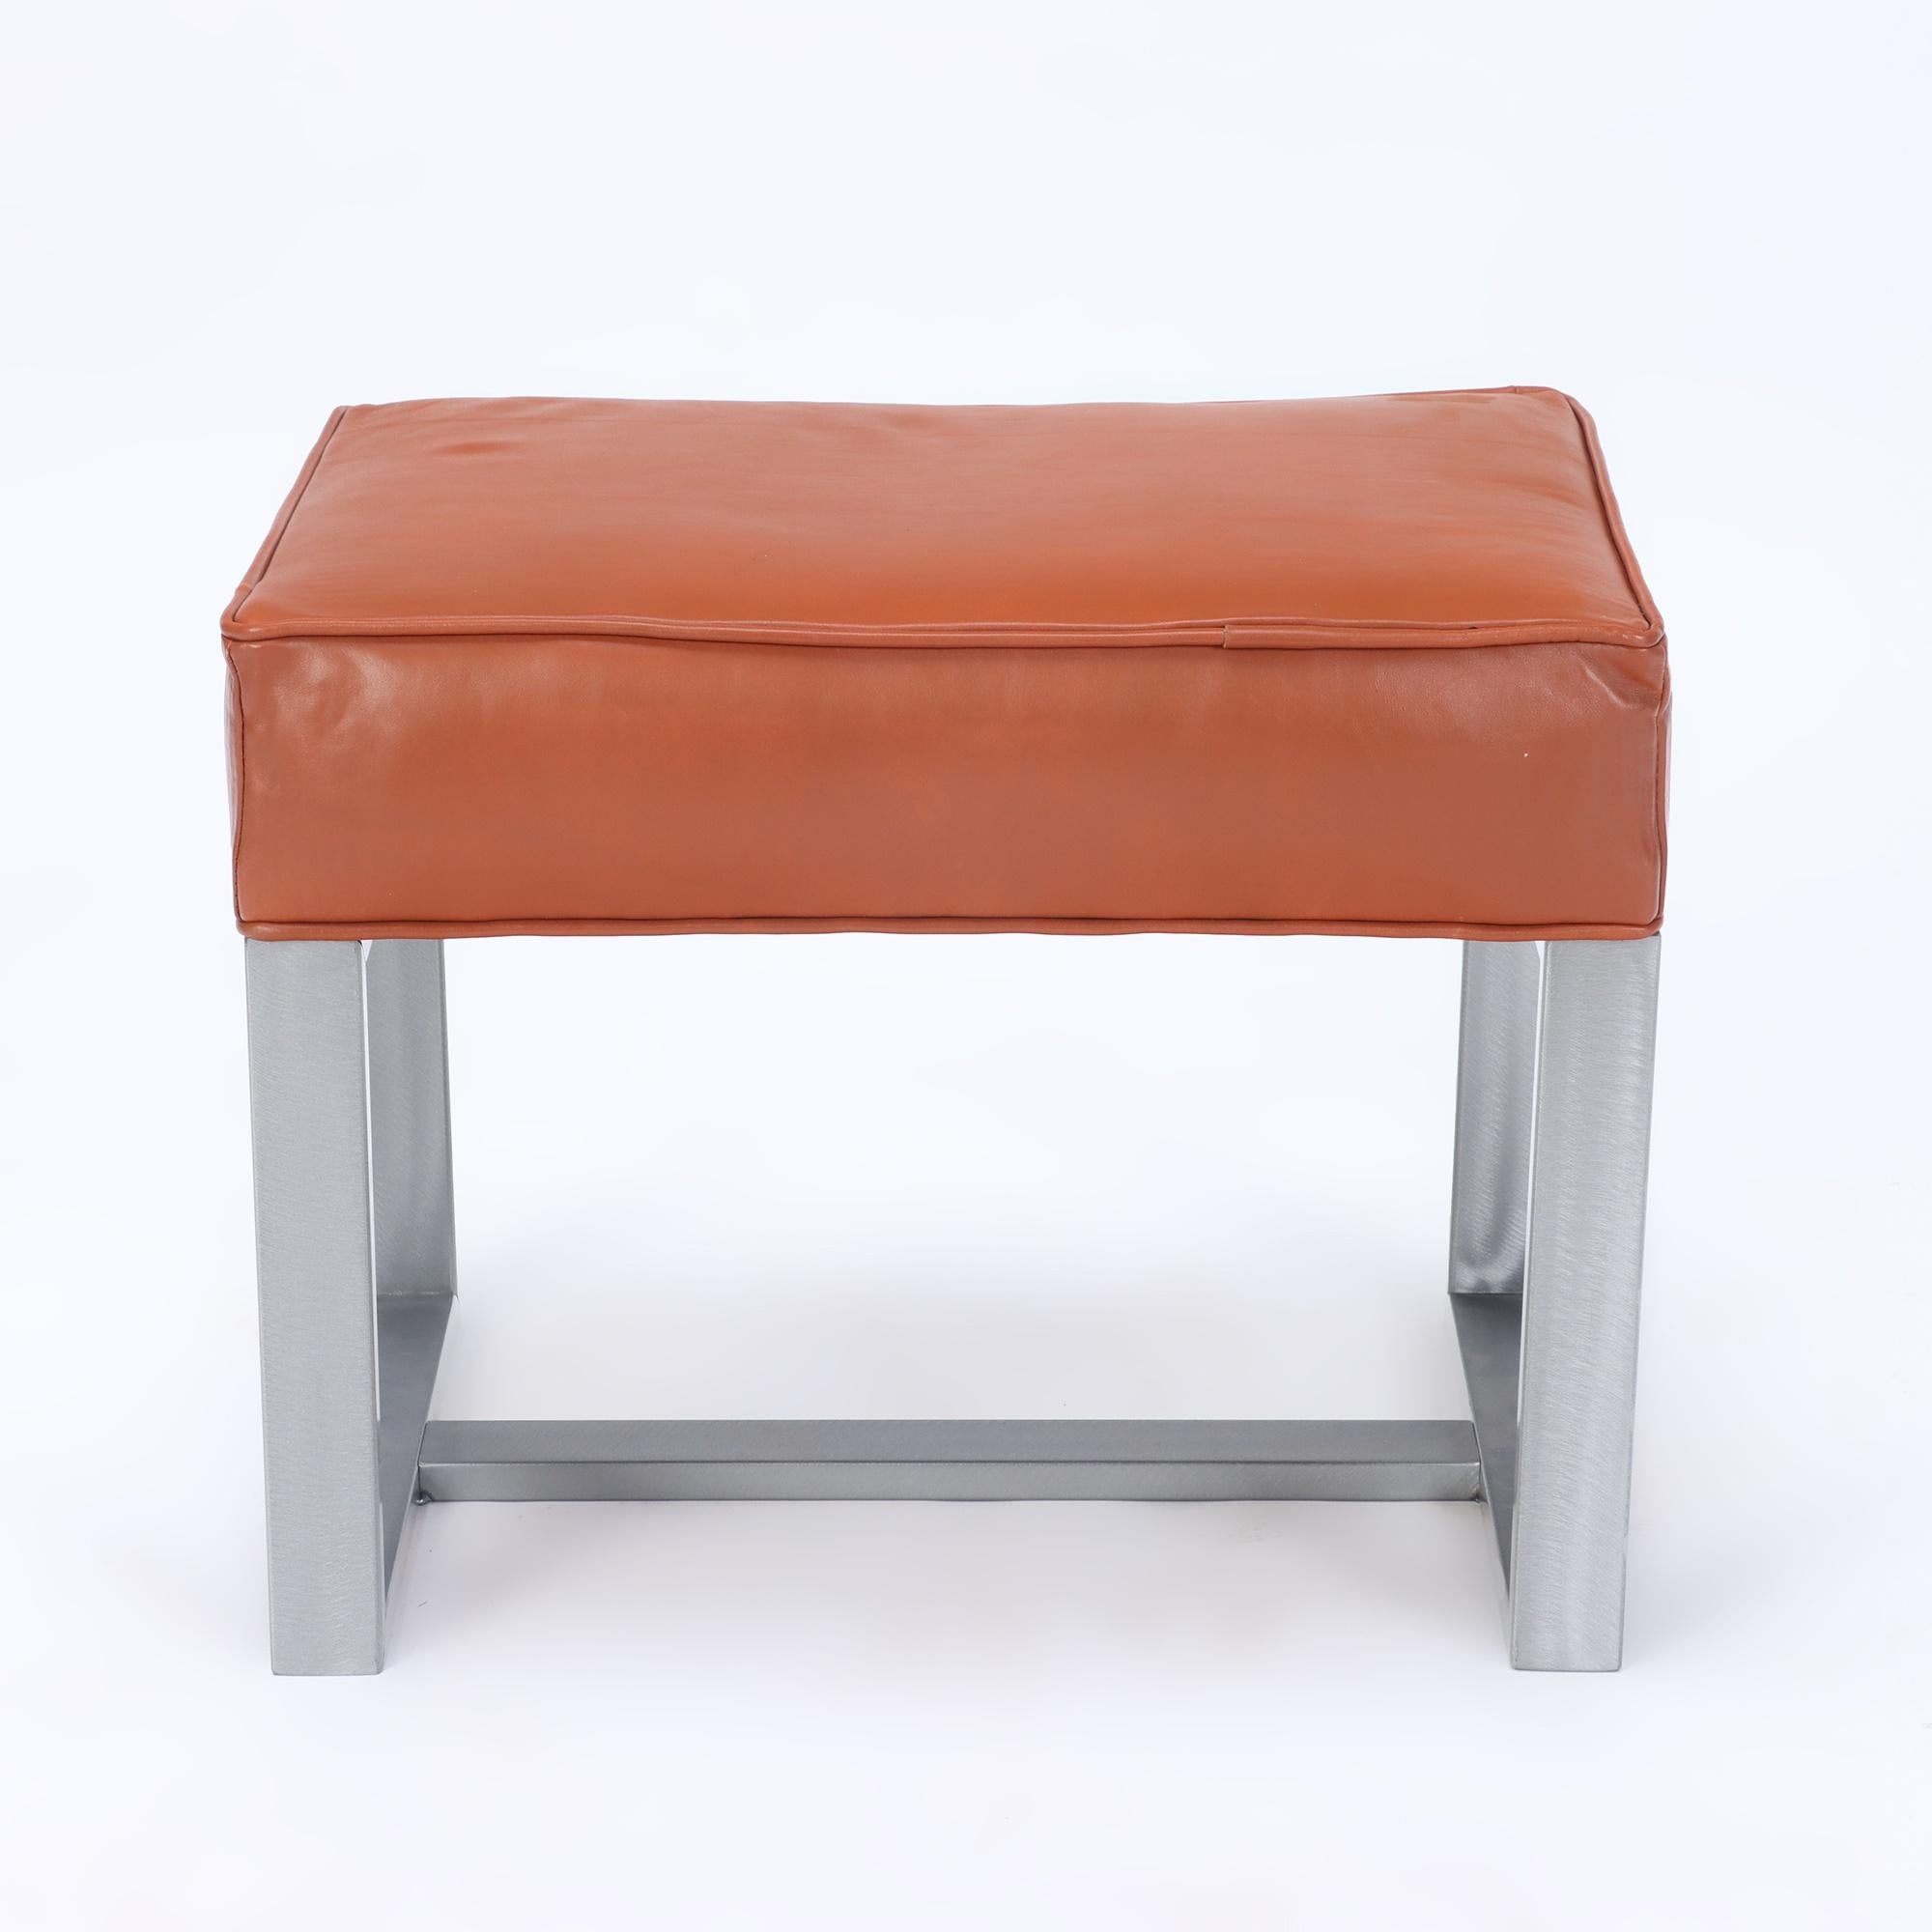 An elegant pair of chrome and leather covered benches or small stools. Contemporary.